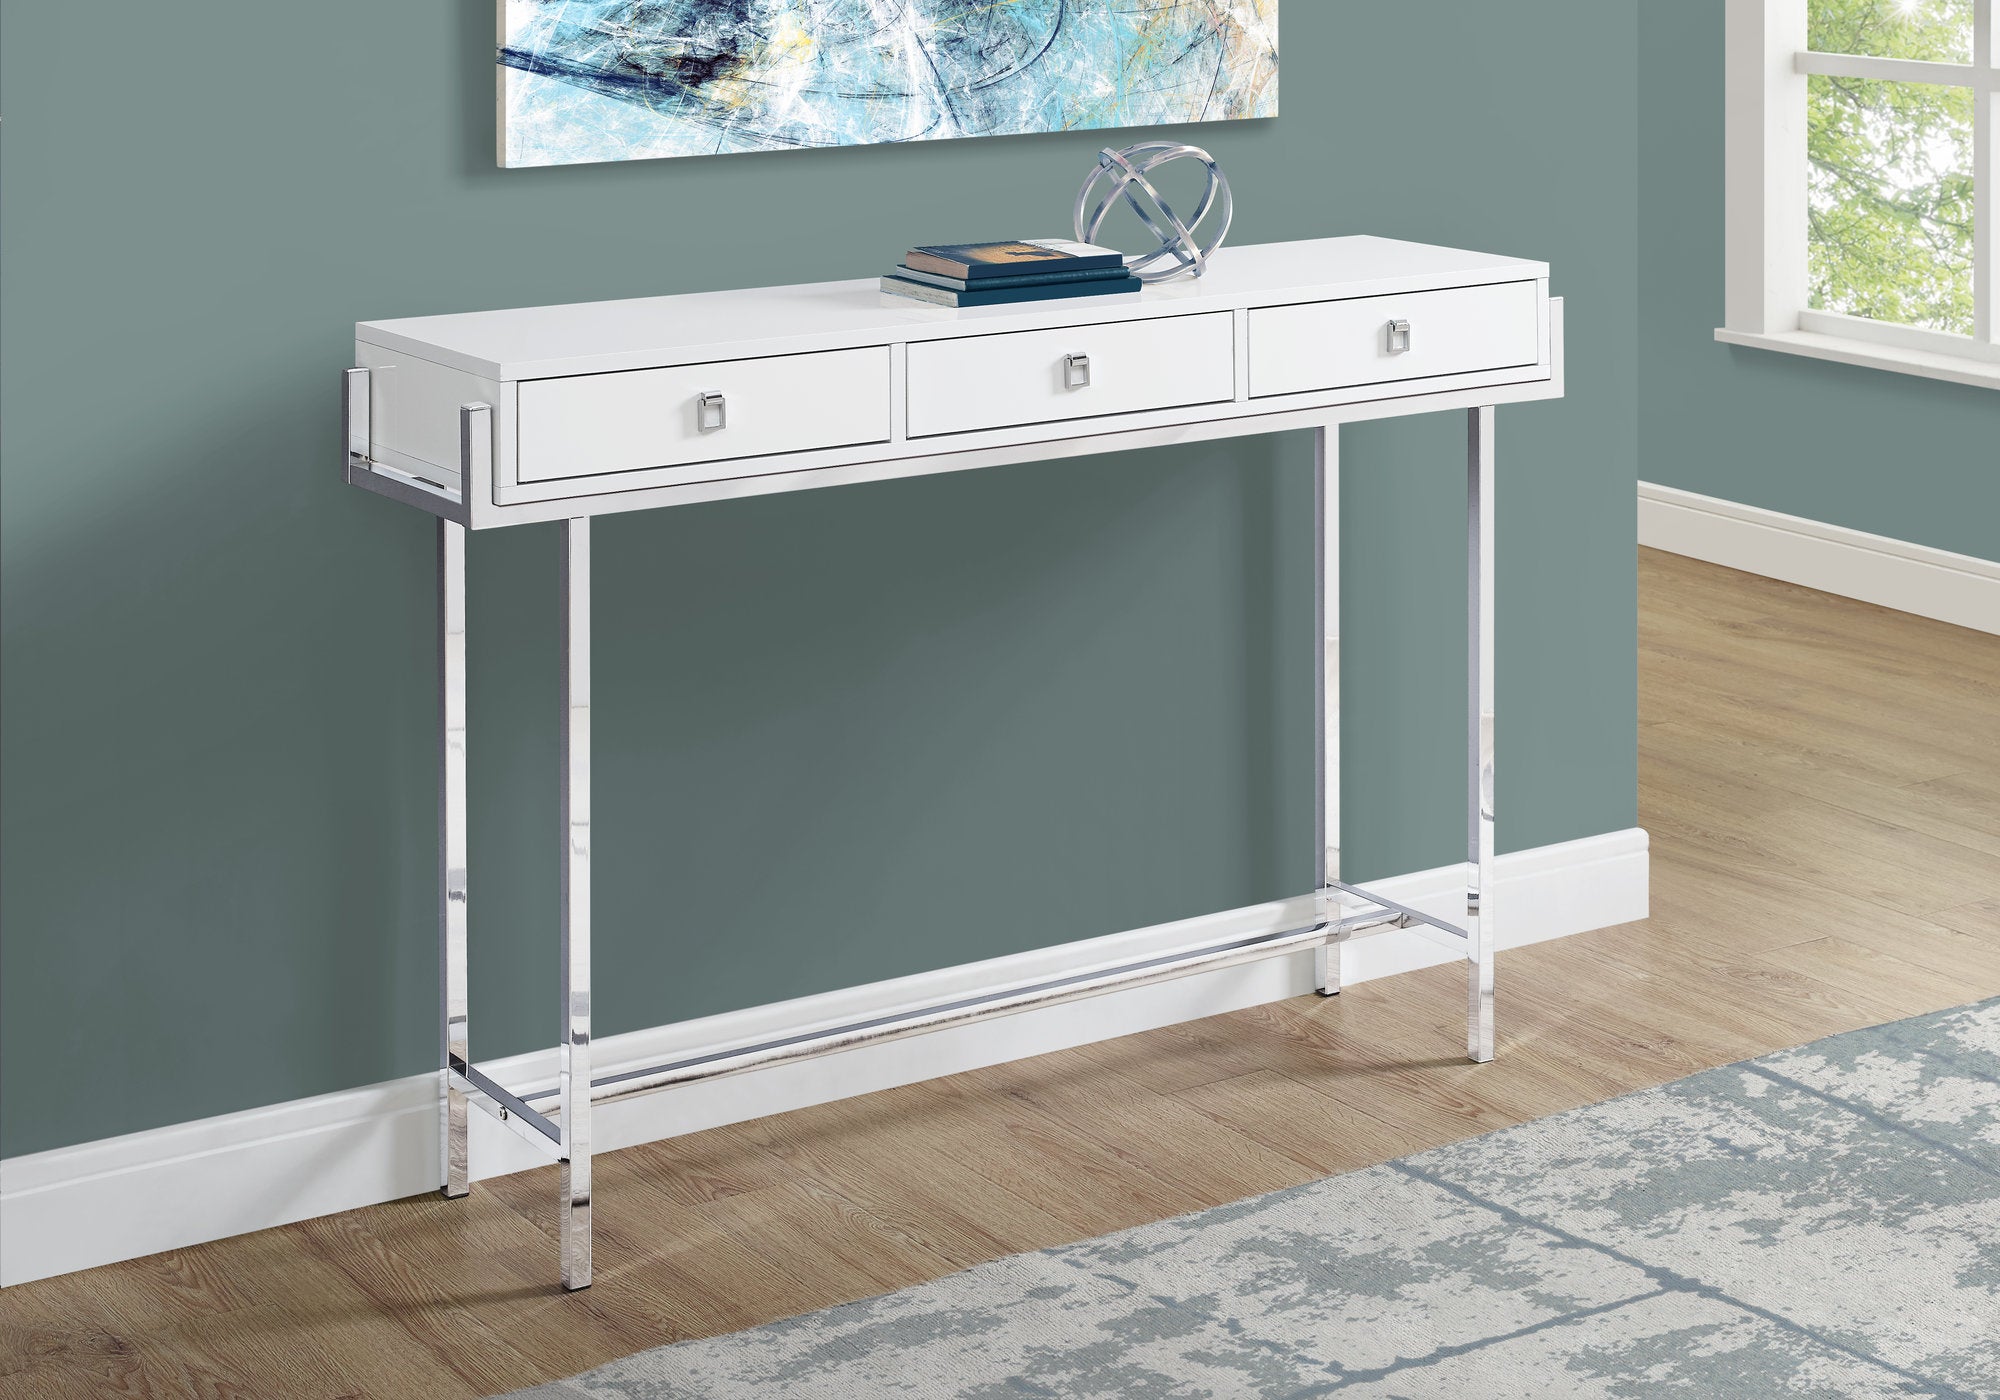 MN-183297    Accent Table, Console, Entryway, Narrow, Sofa, Living Room, Bedroom, Metal Legs, Laminate, Glossy White, Chrome, Contemporary, Modern